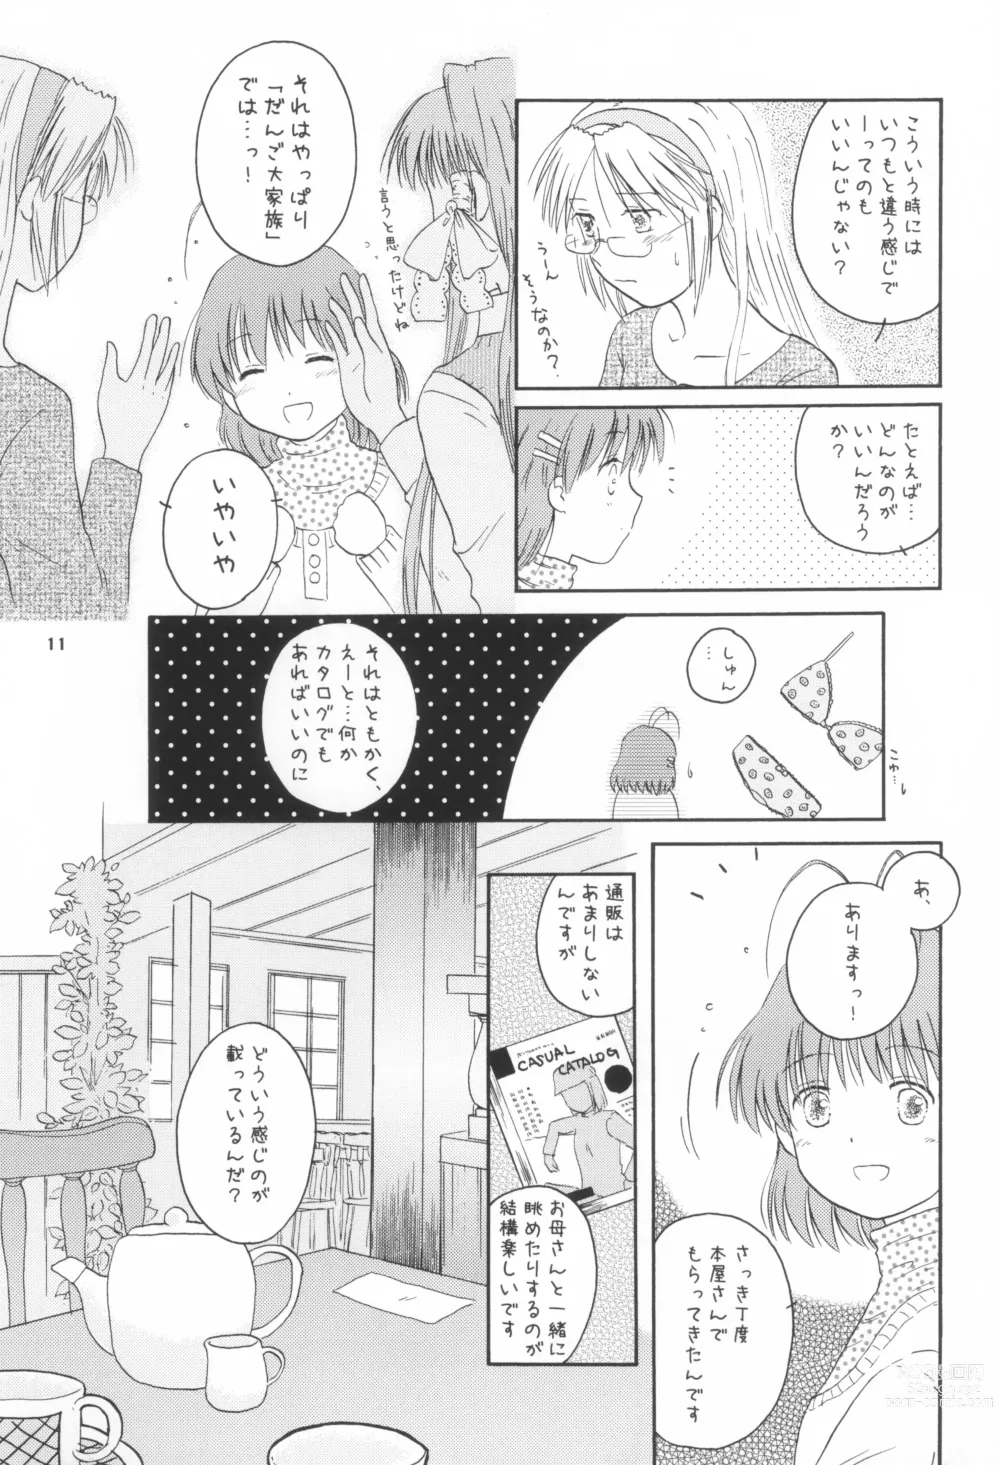 Page 10 of doujinshi A Happy Life